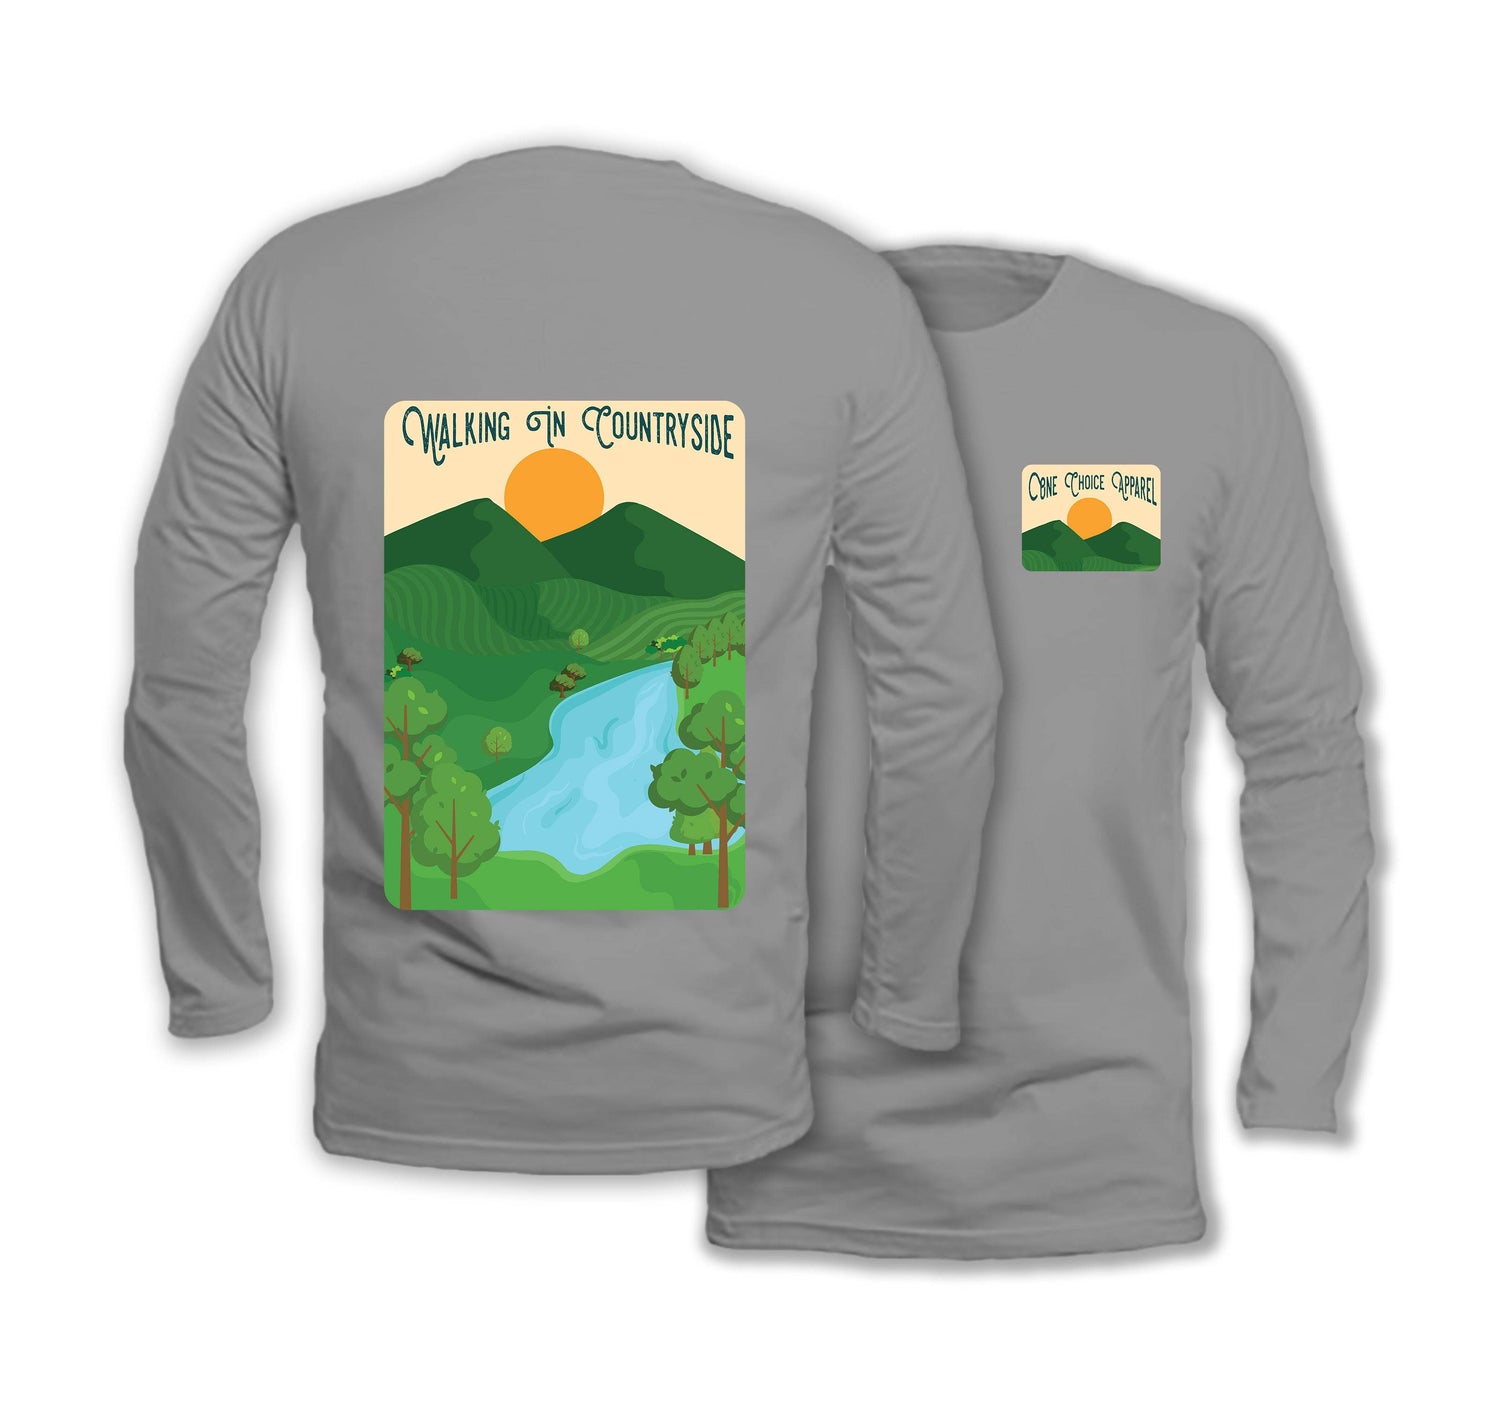 Walking In Countryside - Long Sleeve Organic Cotton T-Shirt - One Choice Apparel